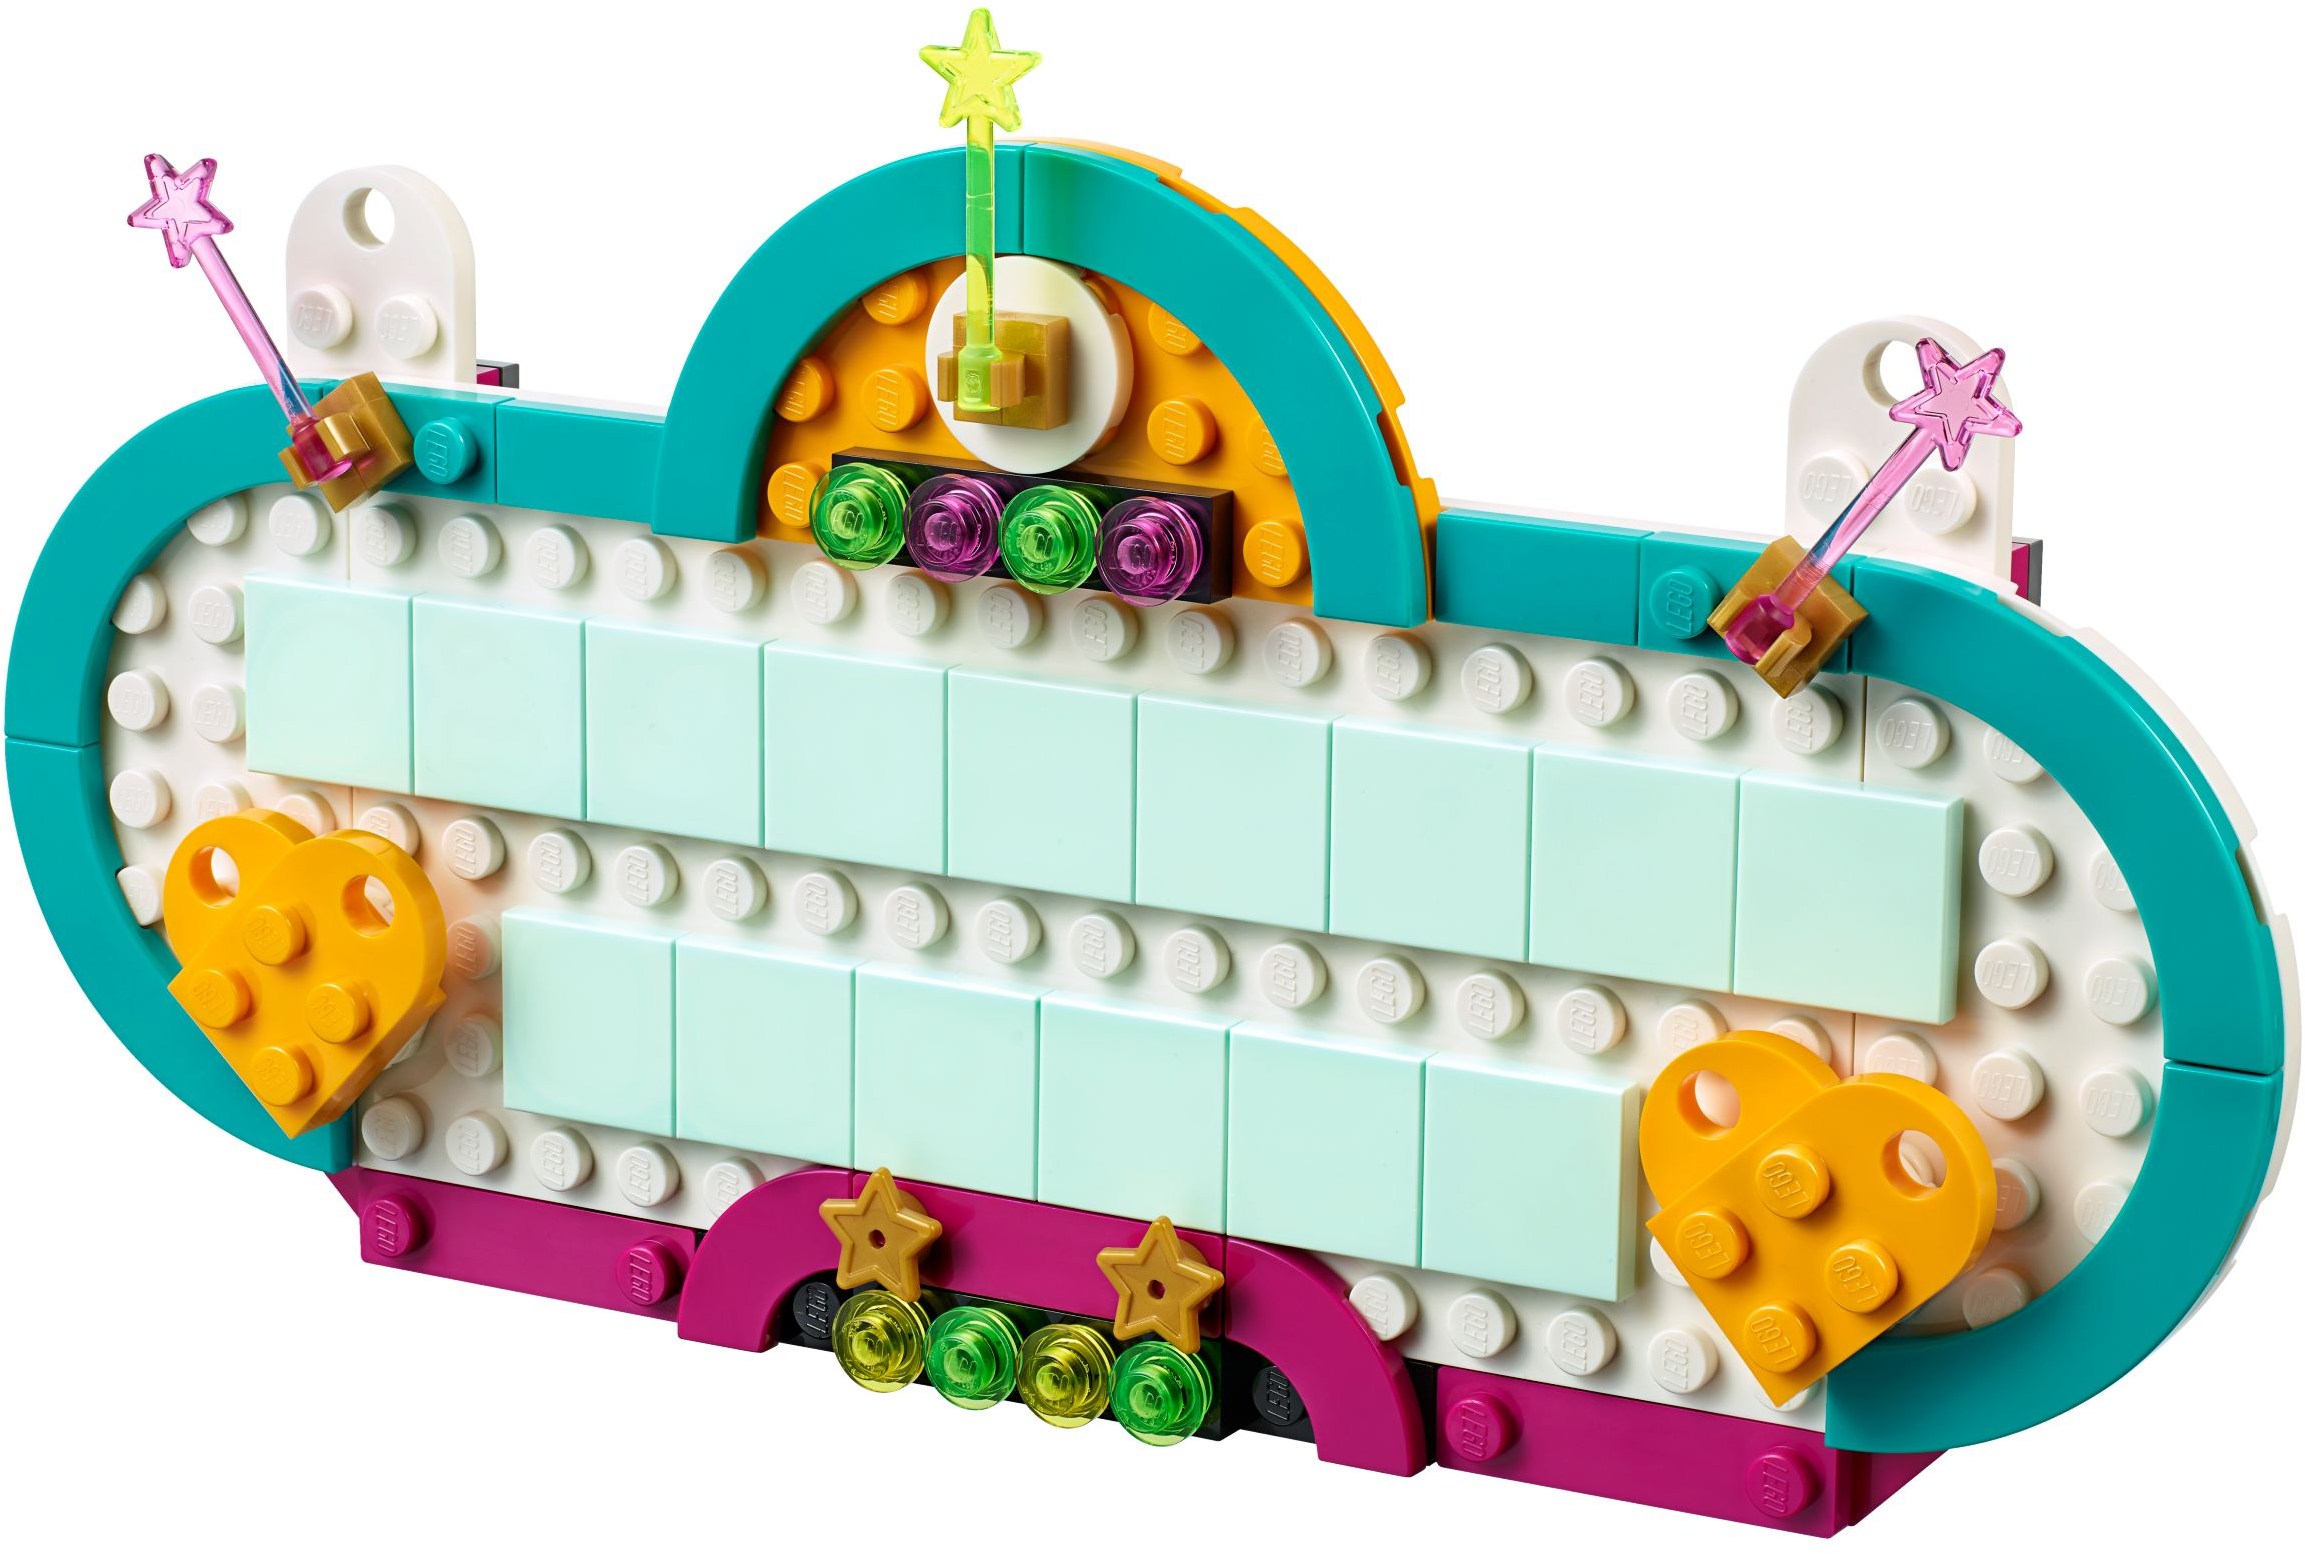 Free Shipping Lego Friends Name Sign 853443 